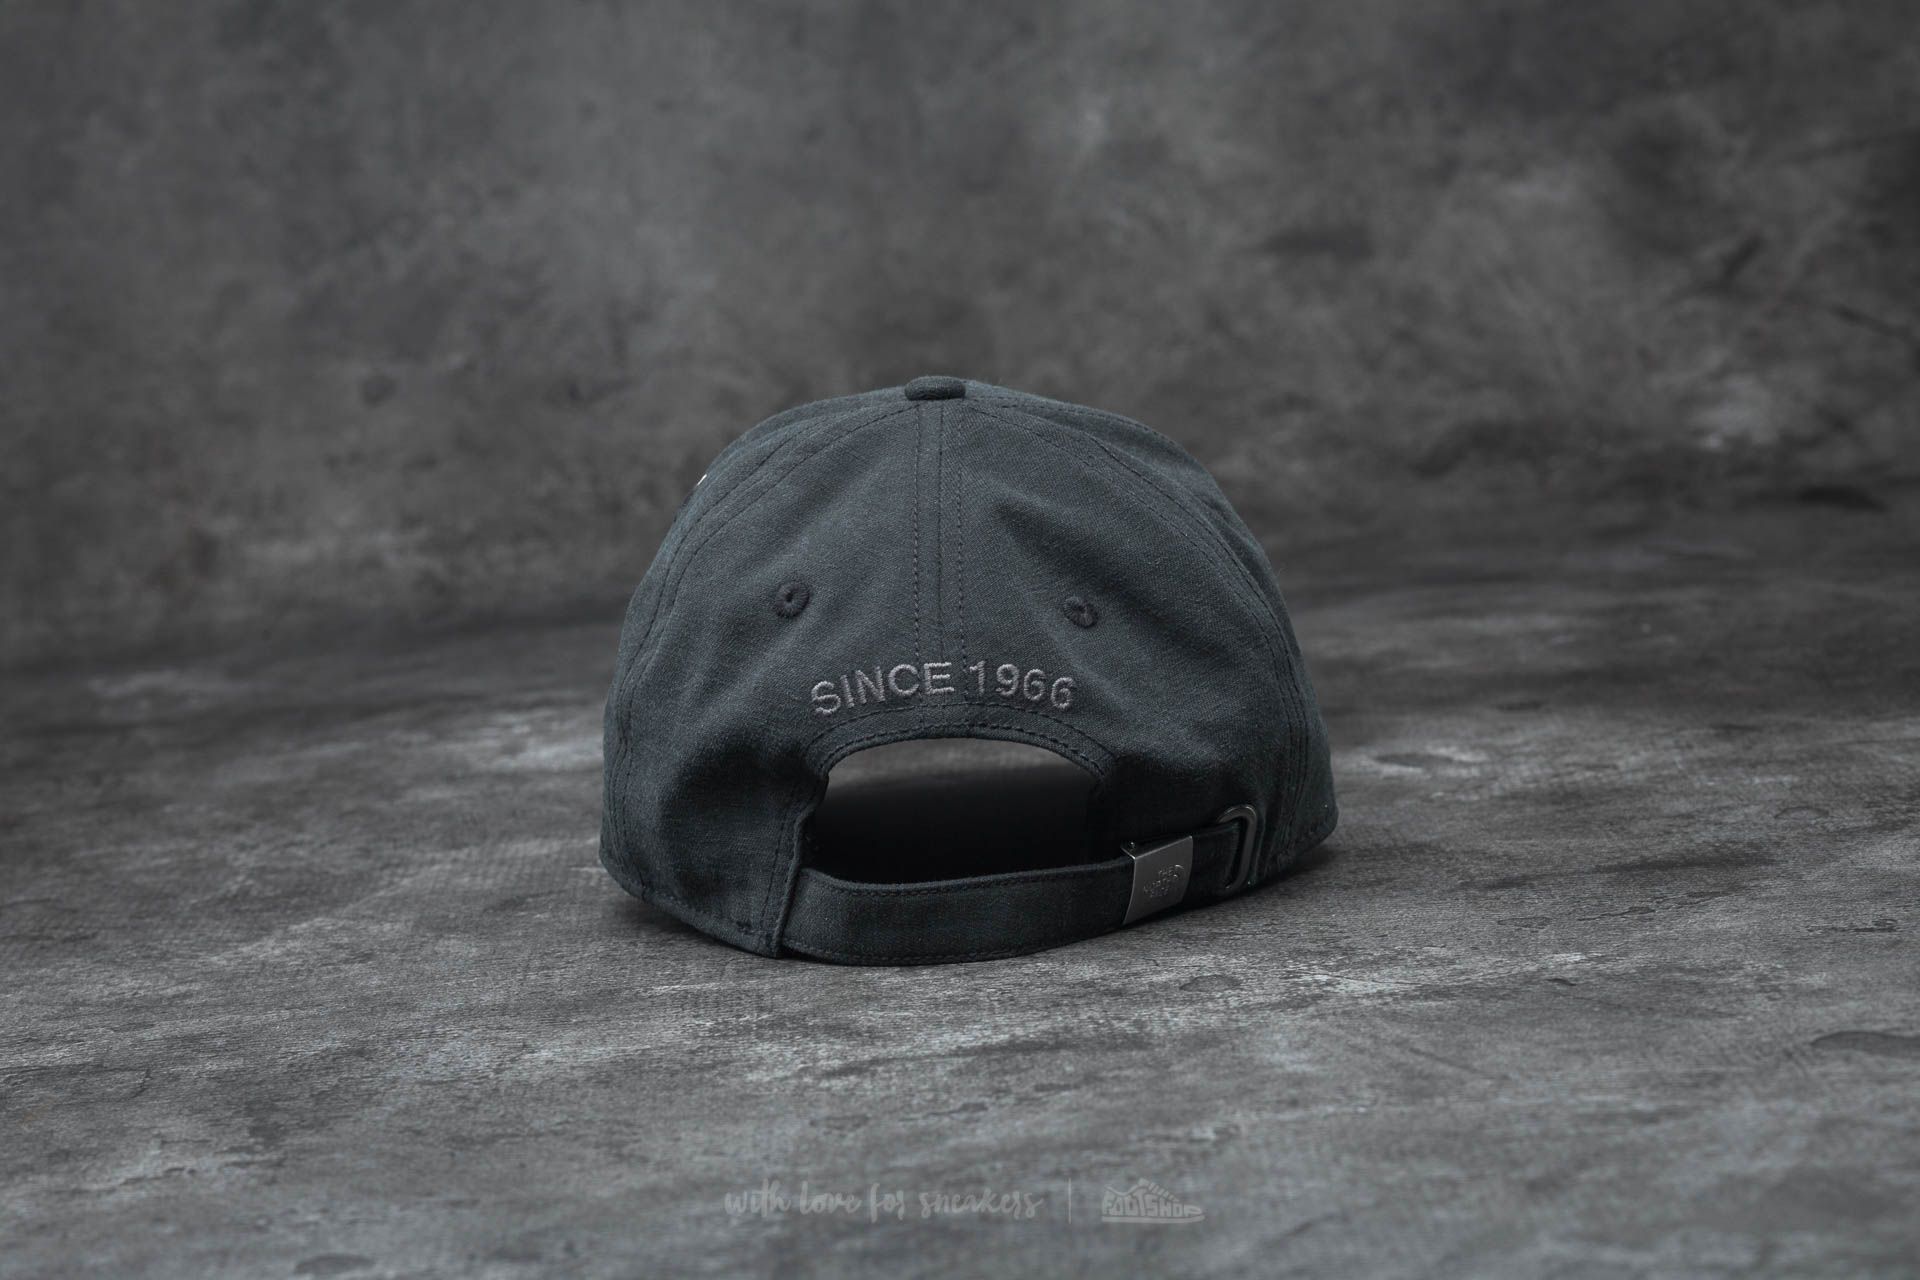 The North Face - 66 Classic - Casquette - Gris - GREY